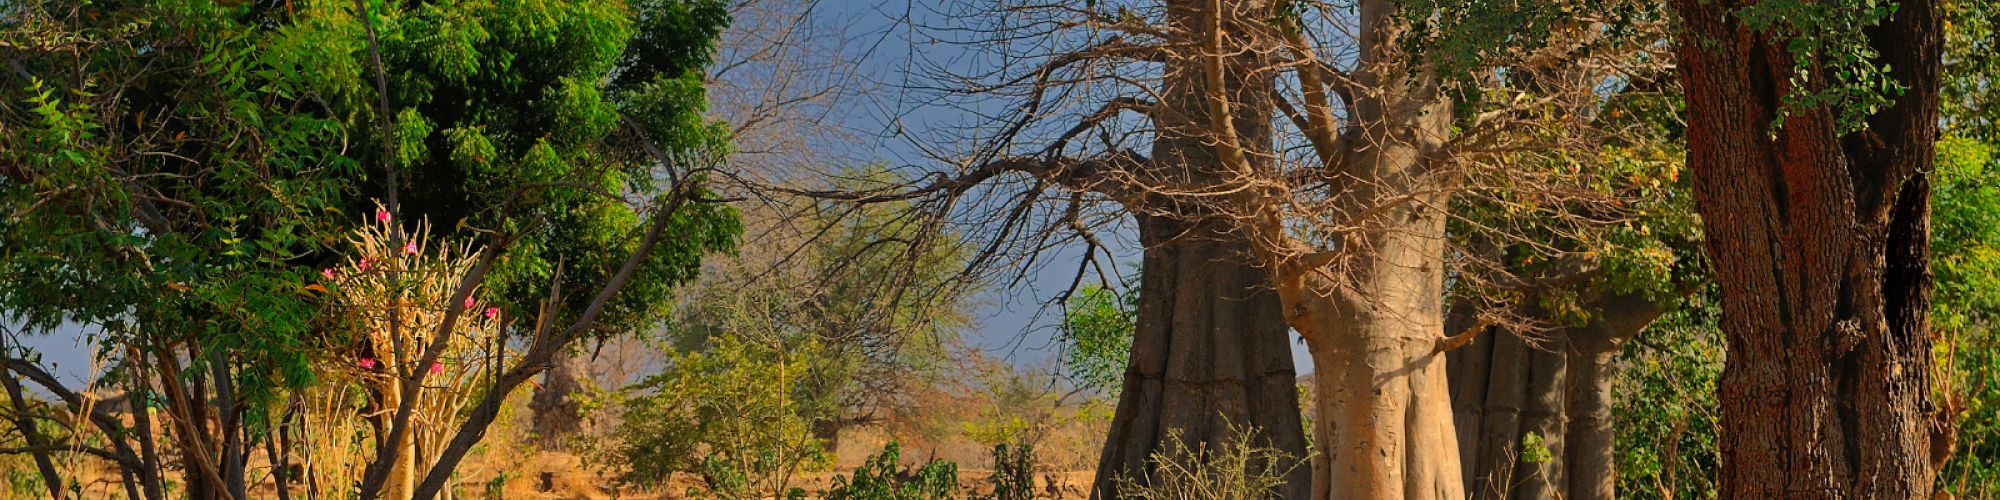 A stand of trees in a dry landscape in Sudan.